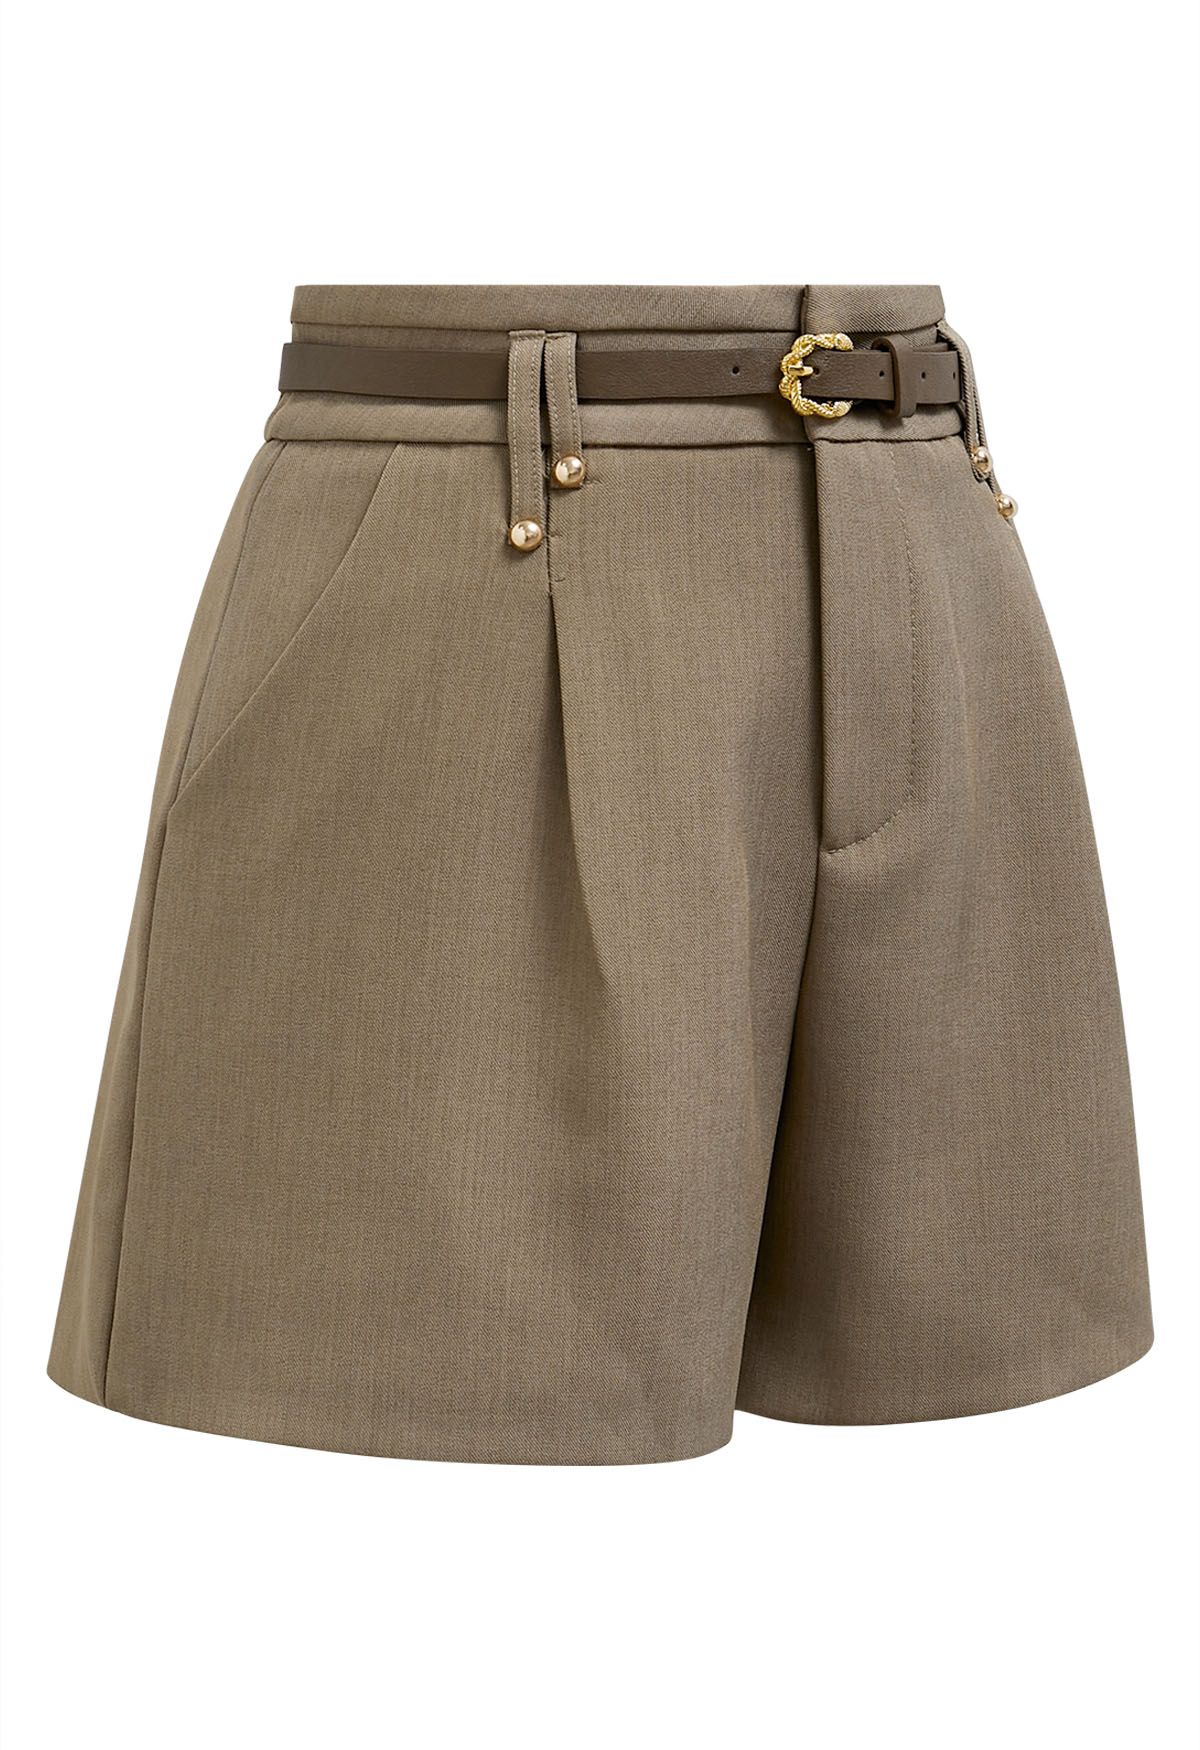 Solid Color Belted Shorts in Brown